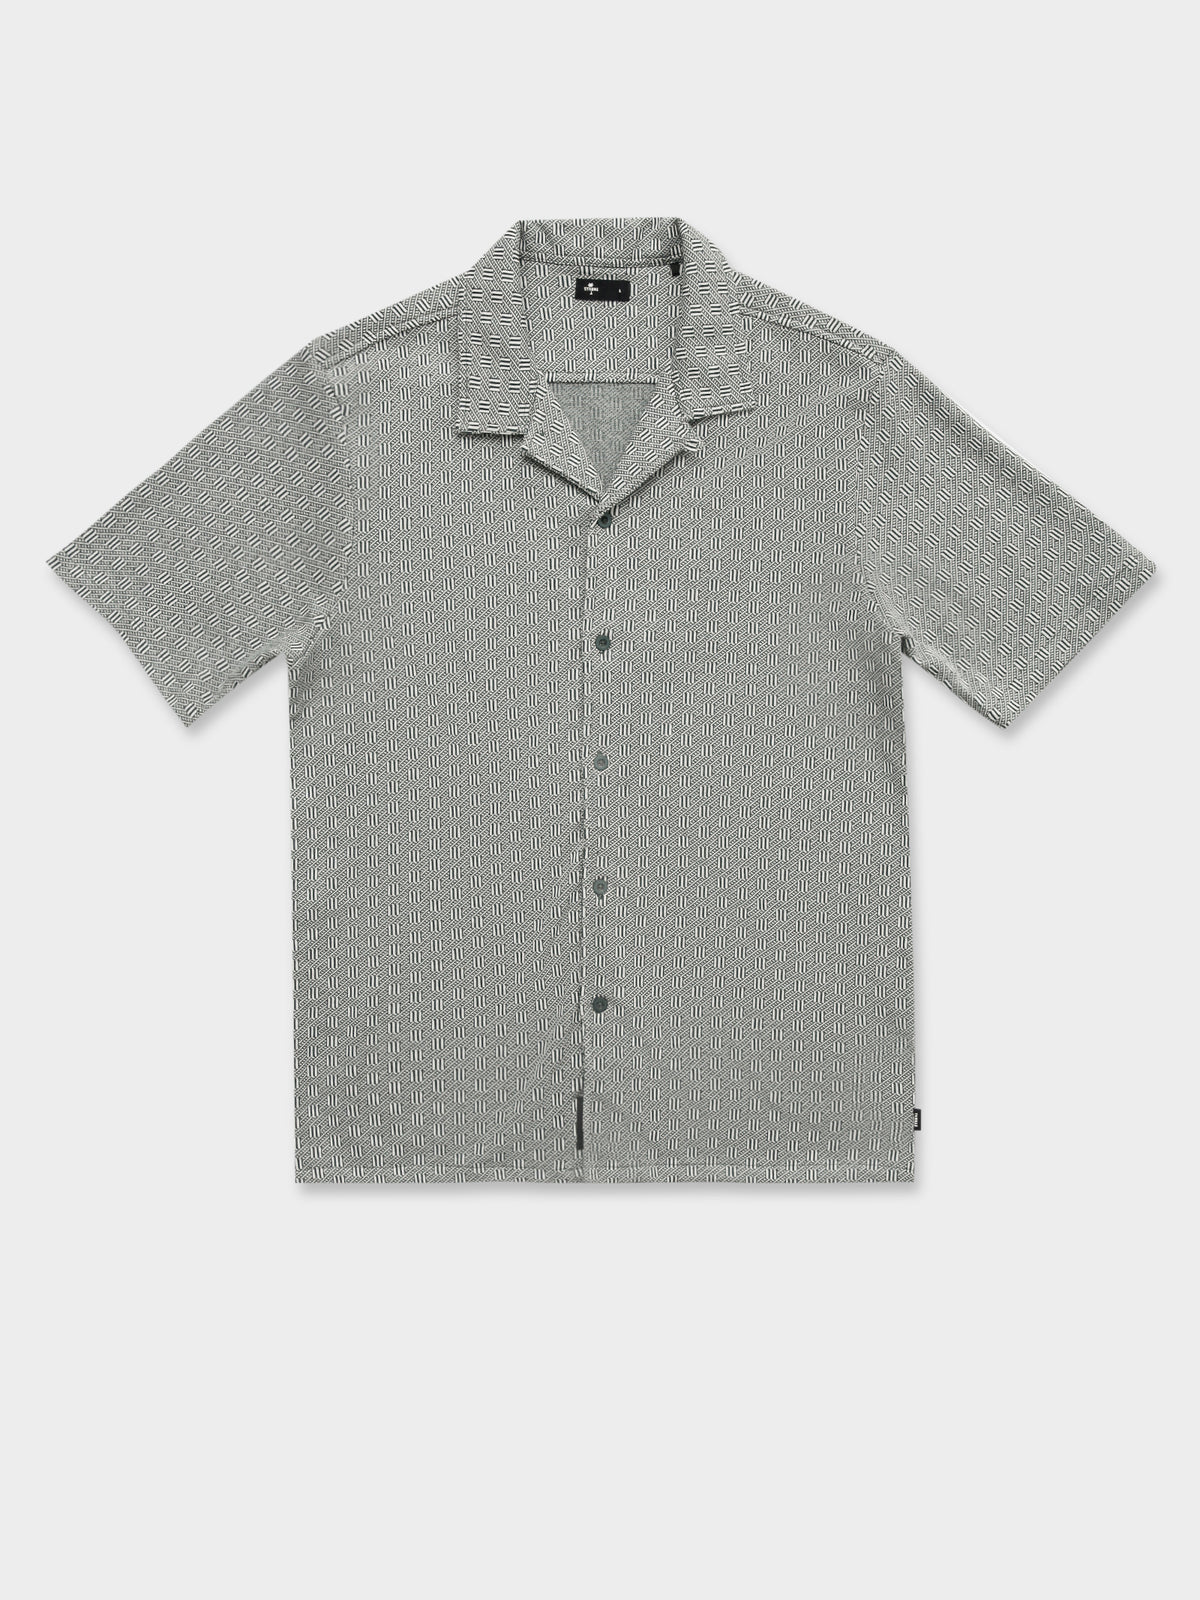 Ease Bowling Shirt in Teal